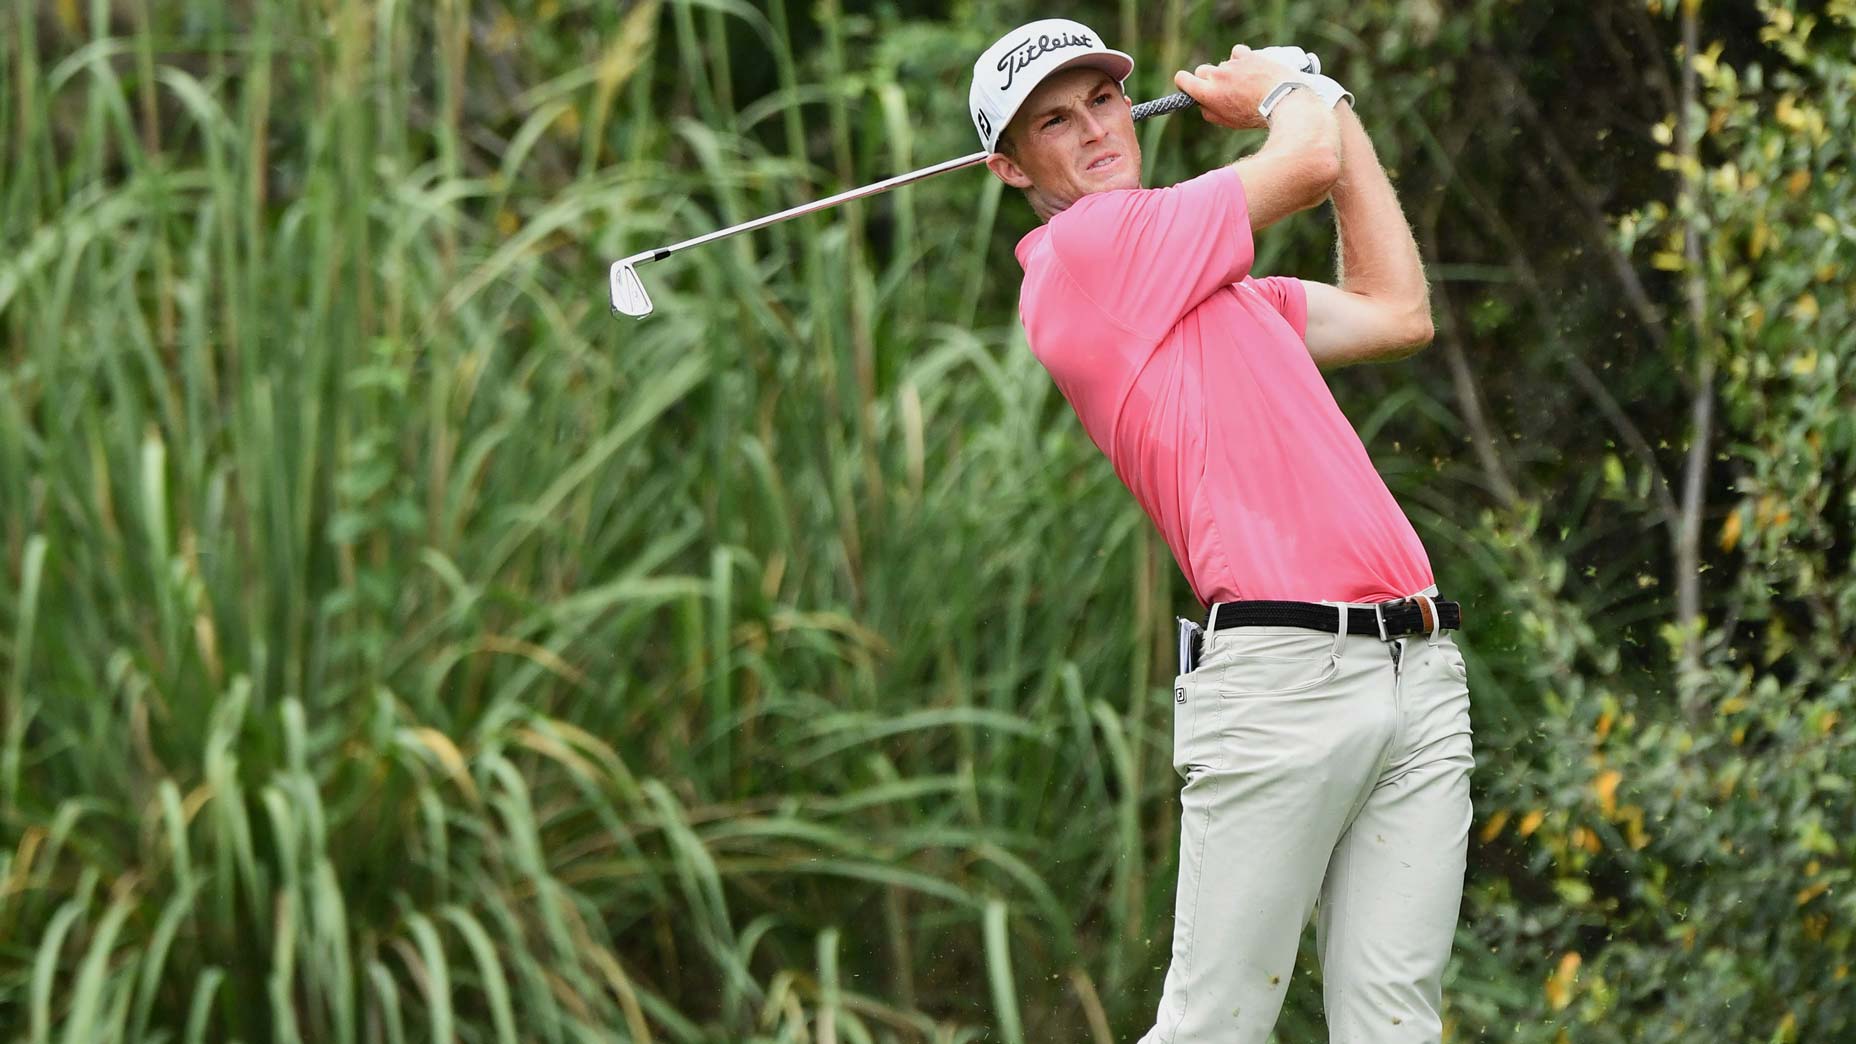 Why A Korn Ferry Tour Player Is The Favorite To Win This Week S Pga Tour Event